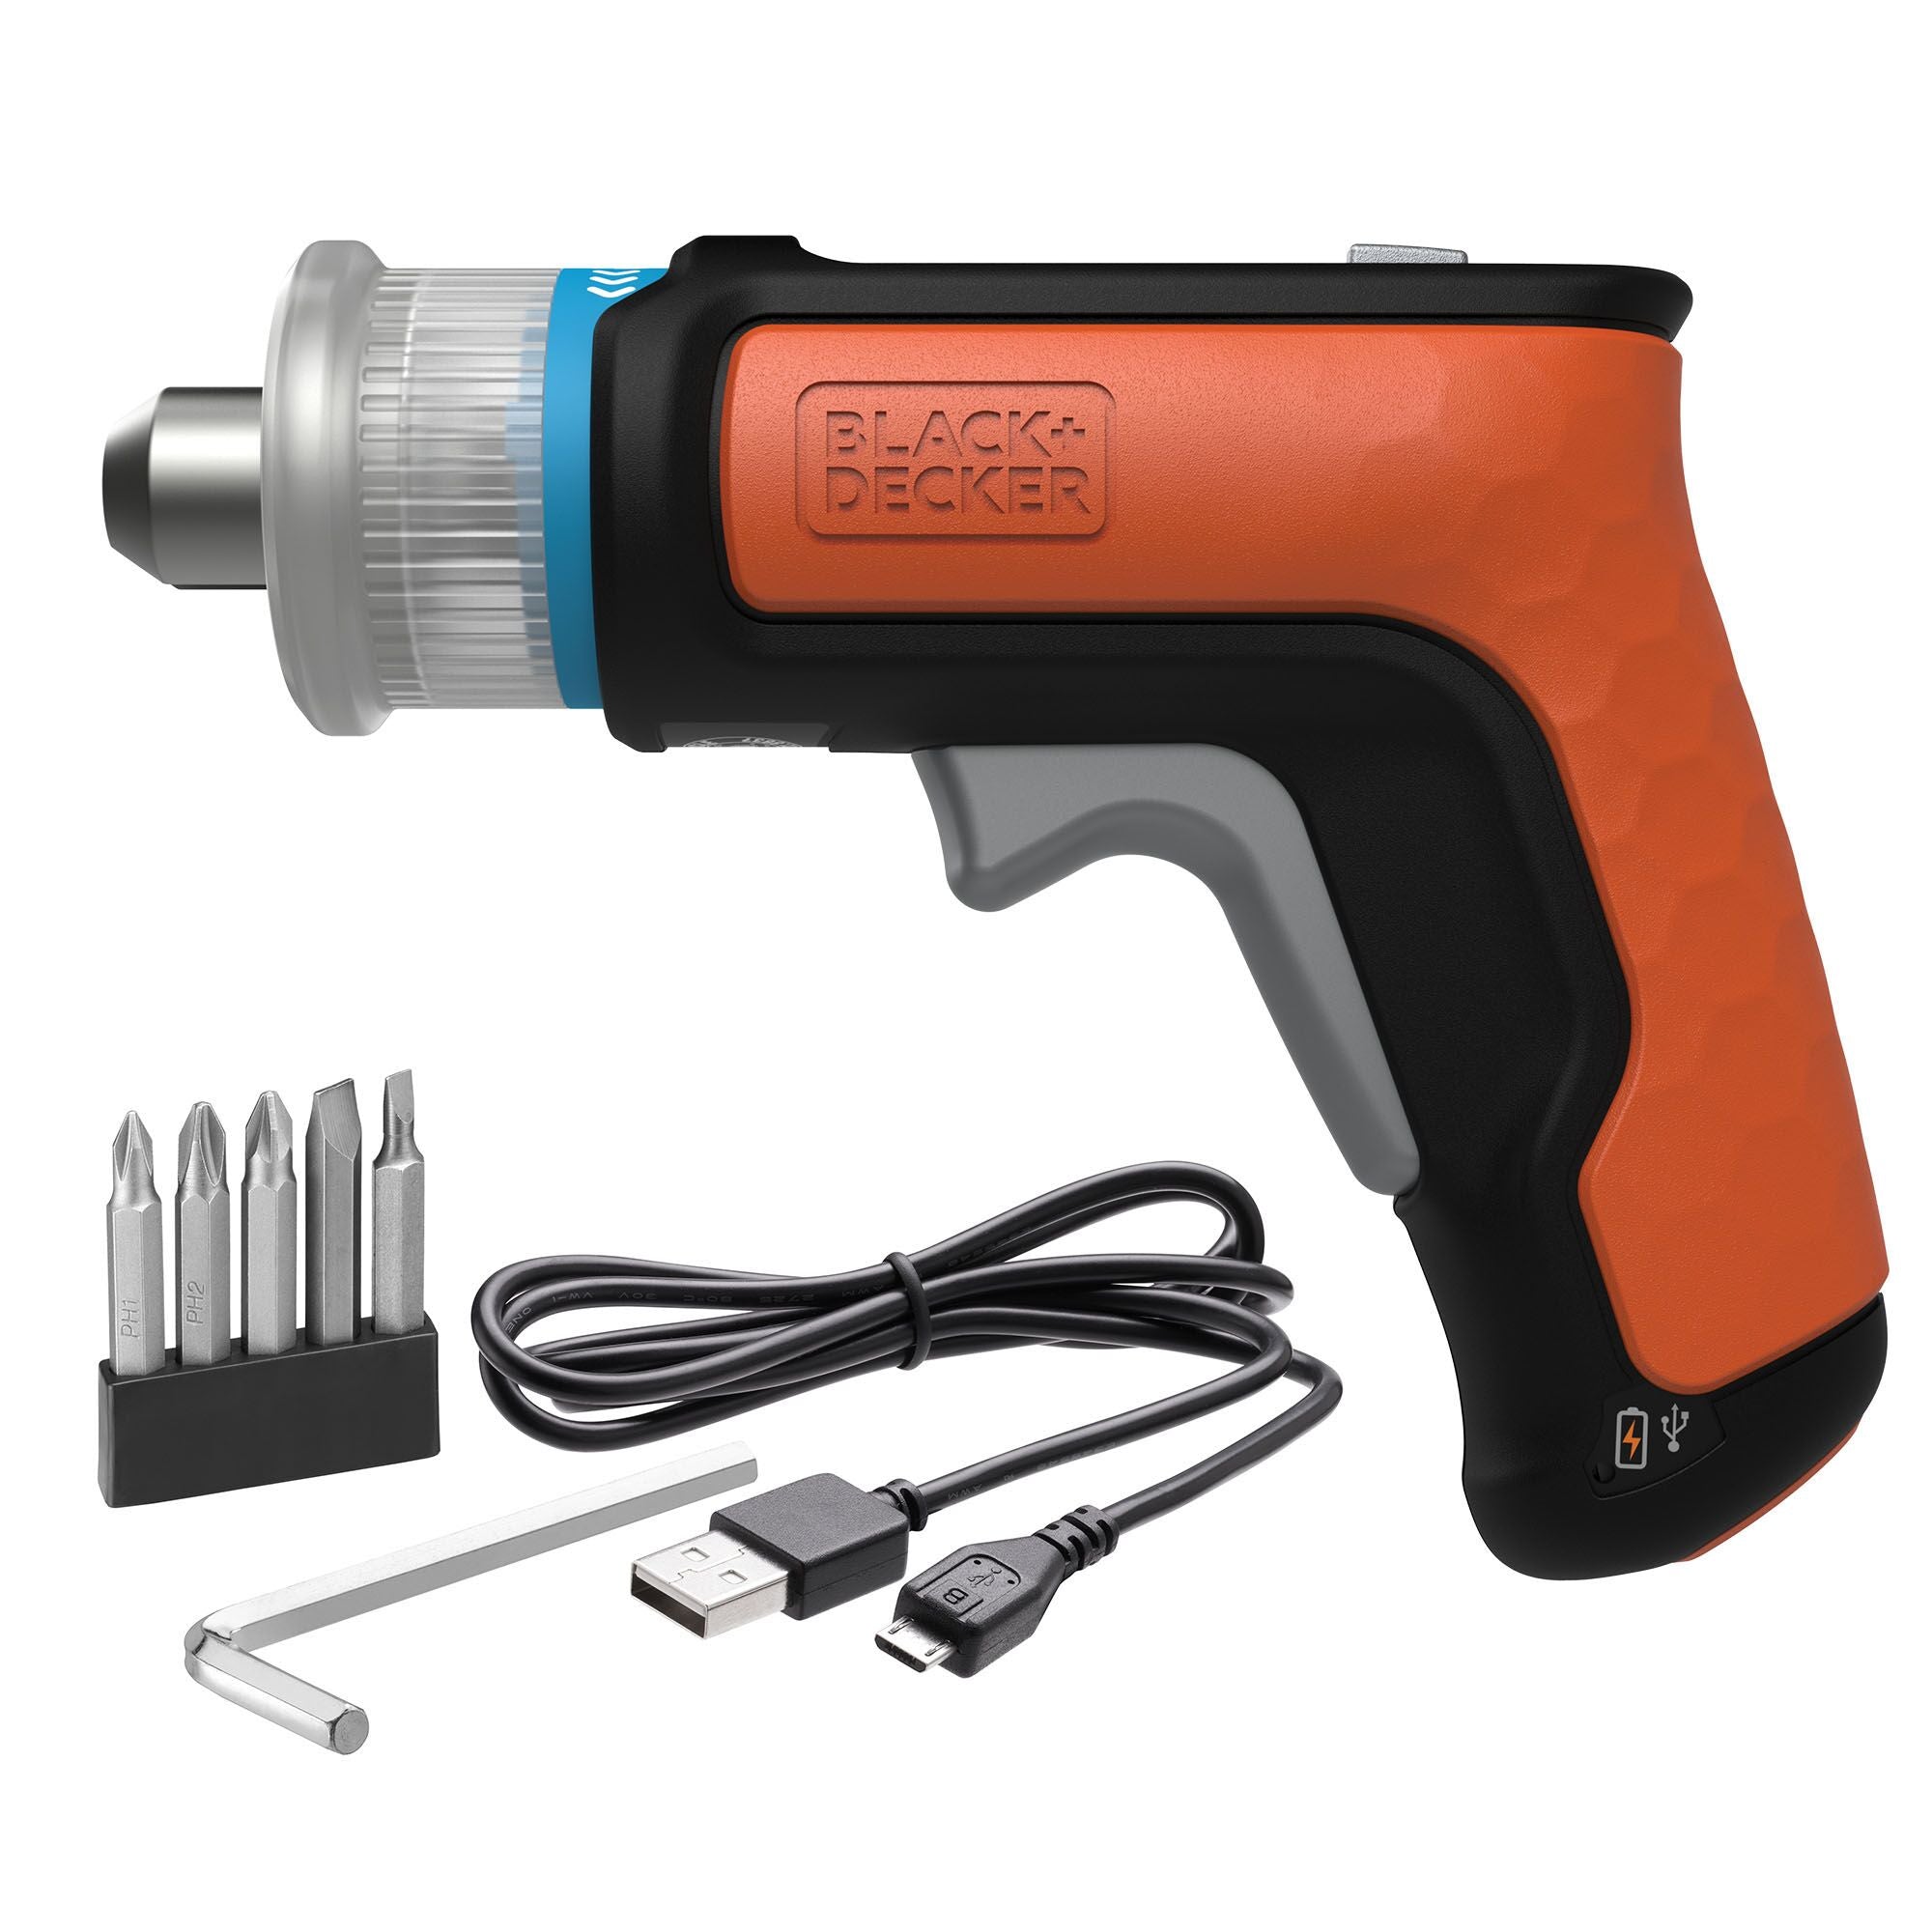  beyond by BLACK+DECKER 4V MAX* Cordless Screwdriver, Fast  Charge, 1-Inch Assorted Bits (BCF611CBAPB) : Everything Else